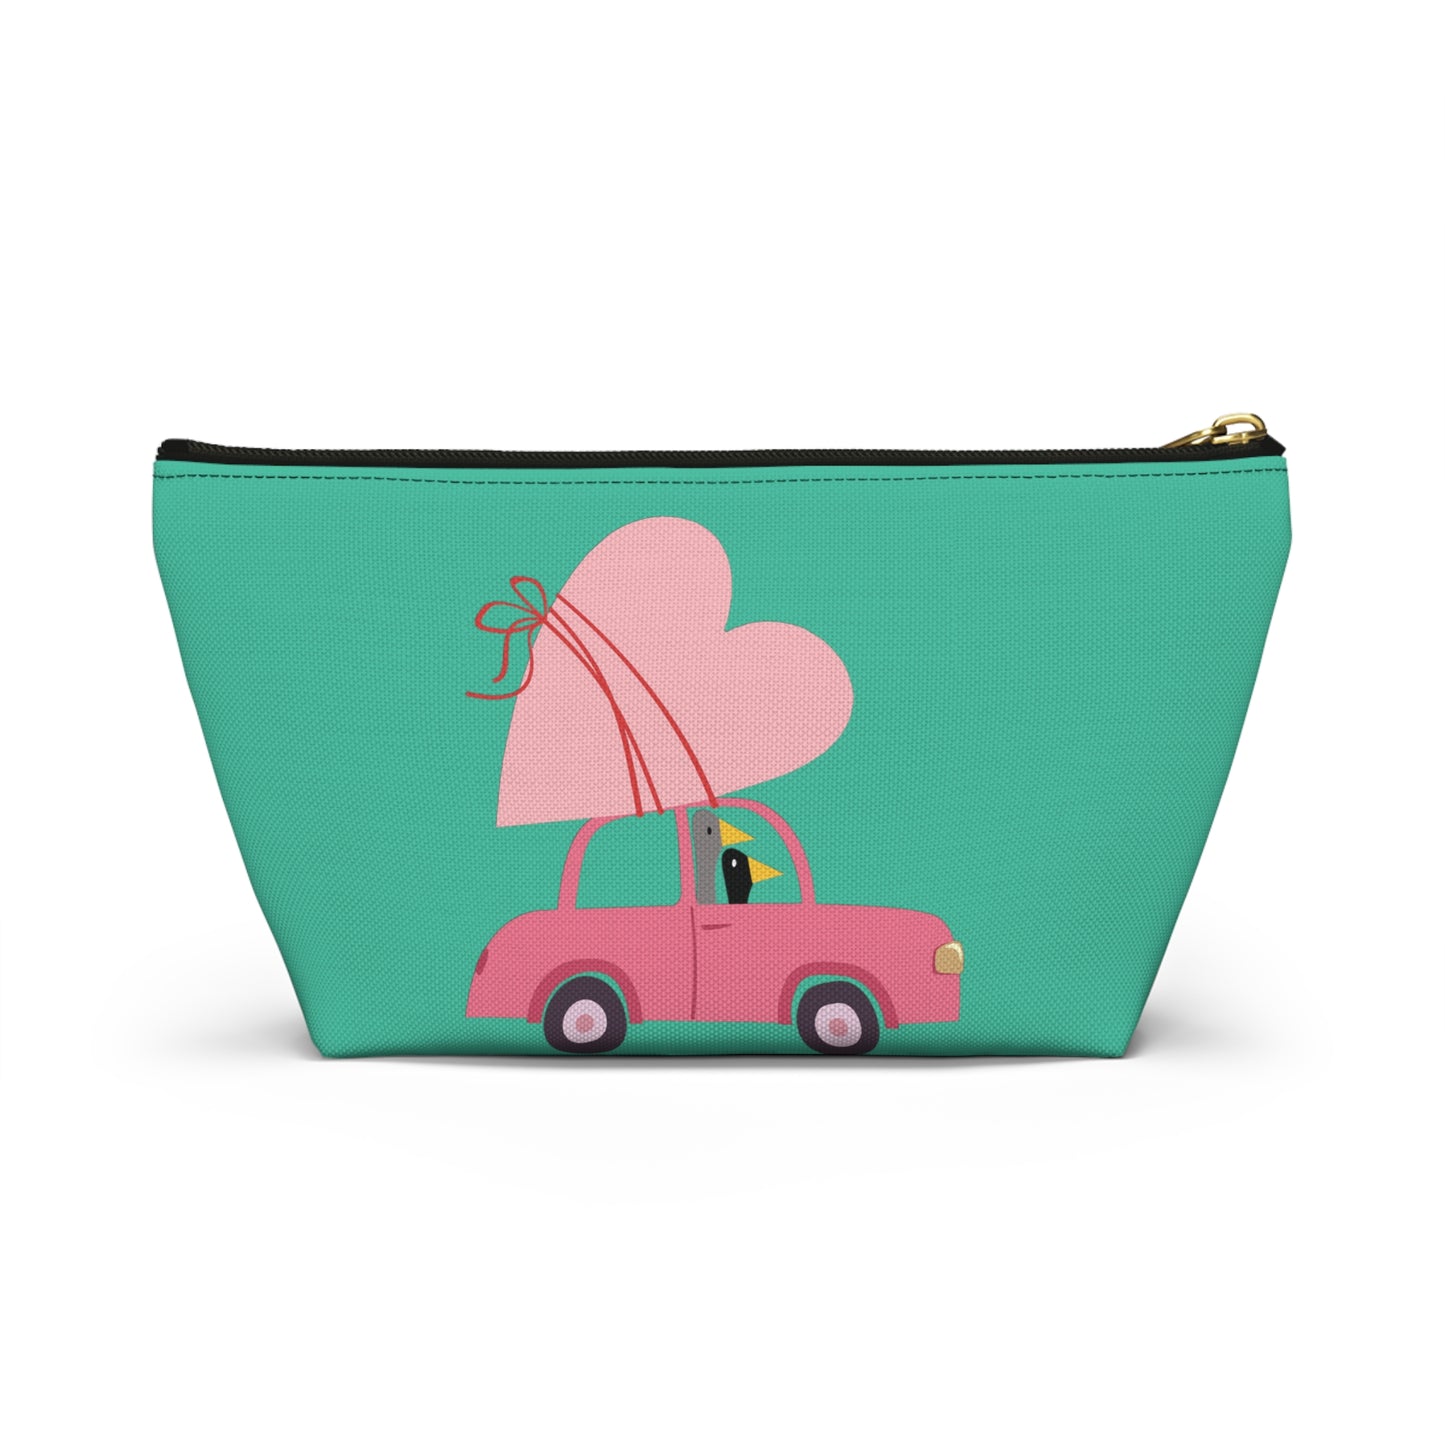 Ducks delivering some love - Logo - Turquoise 12d3ad - Accessory Pouch w T-bottom